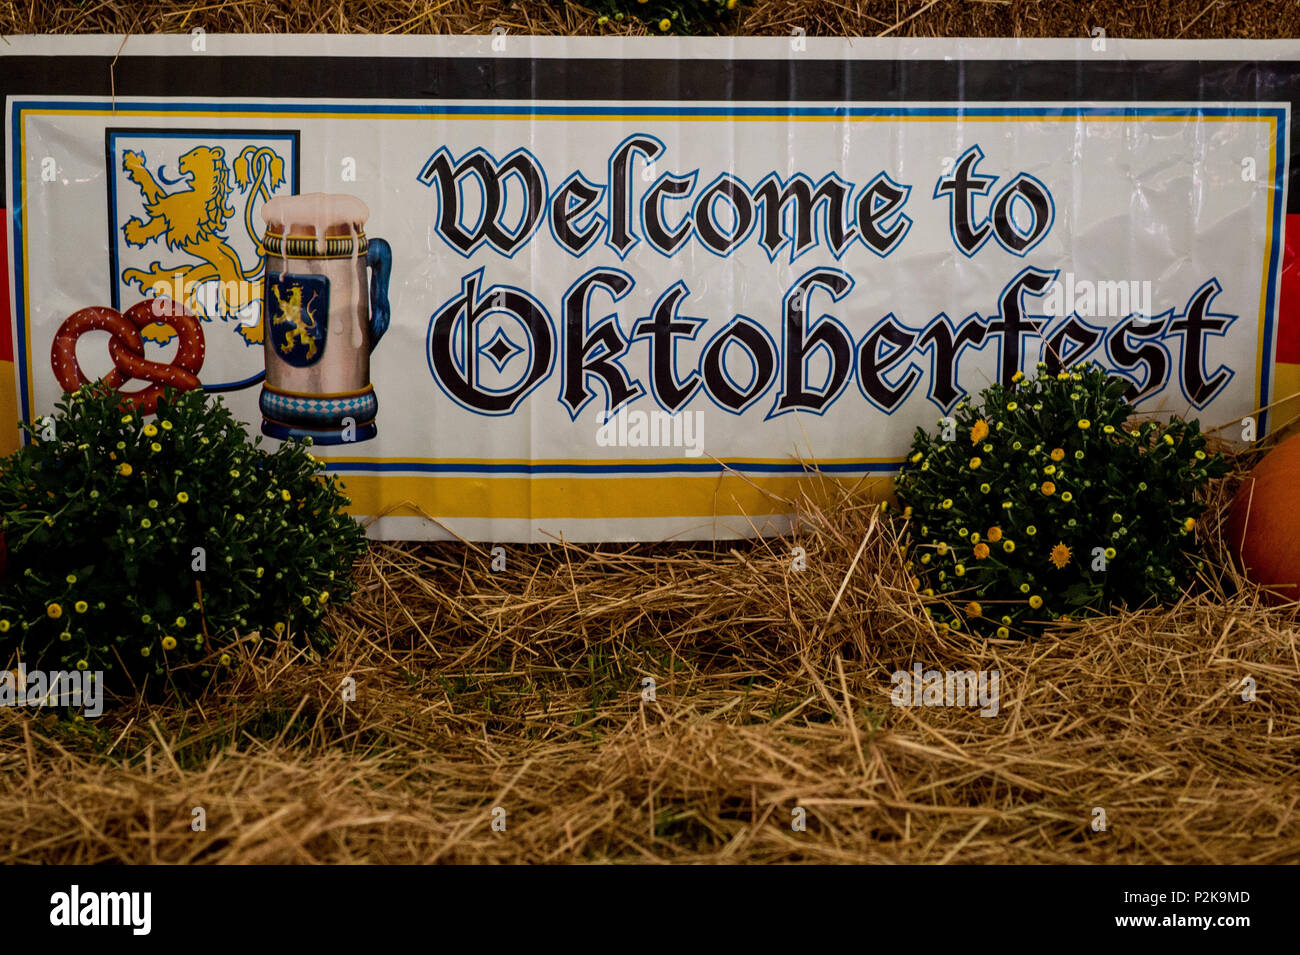 Each year Joint Base Langley-Eustis, Va., hosts an Oktoberfest celebration to kick off the fall season at Joint Base Langley-Eustis, Va., Sept. 30, 2016. Oktoberfest was originally held to honor the marriage of Prince Ludwig and Therese of Saxe-Hildburghausen in 1810. (U.S. Air Force photo by Airman 1st Class Derek Seifert) Stock Photo